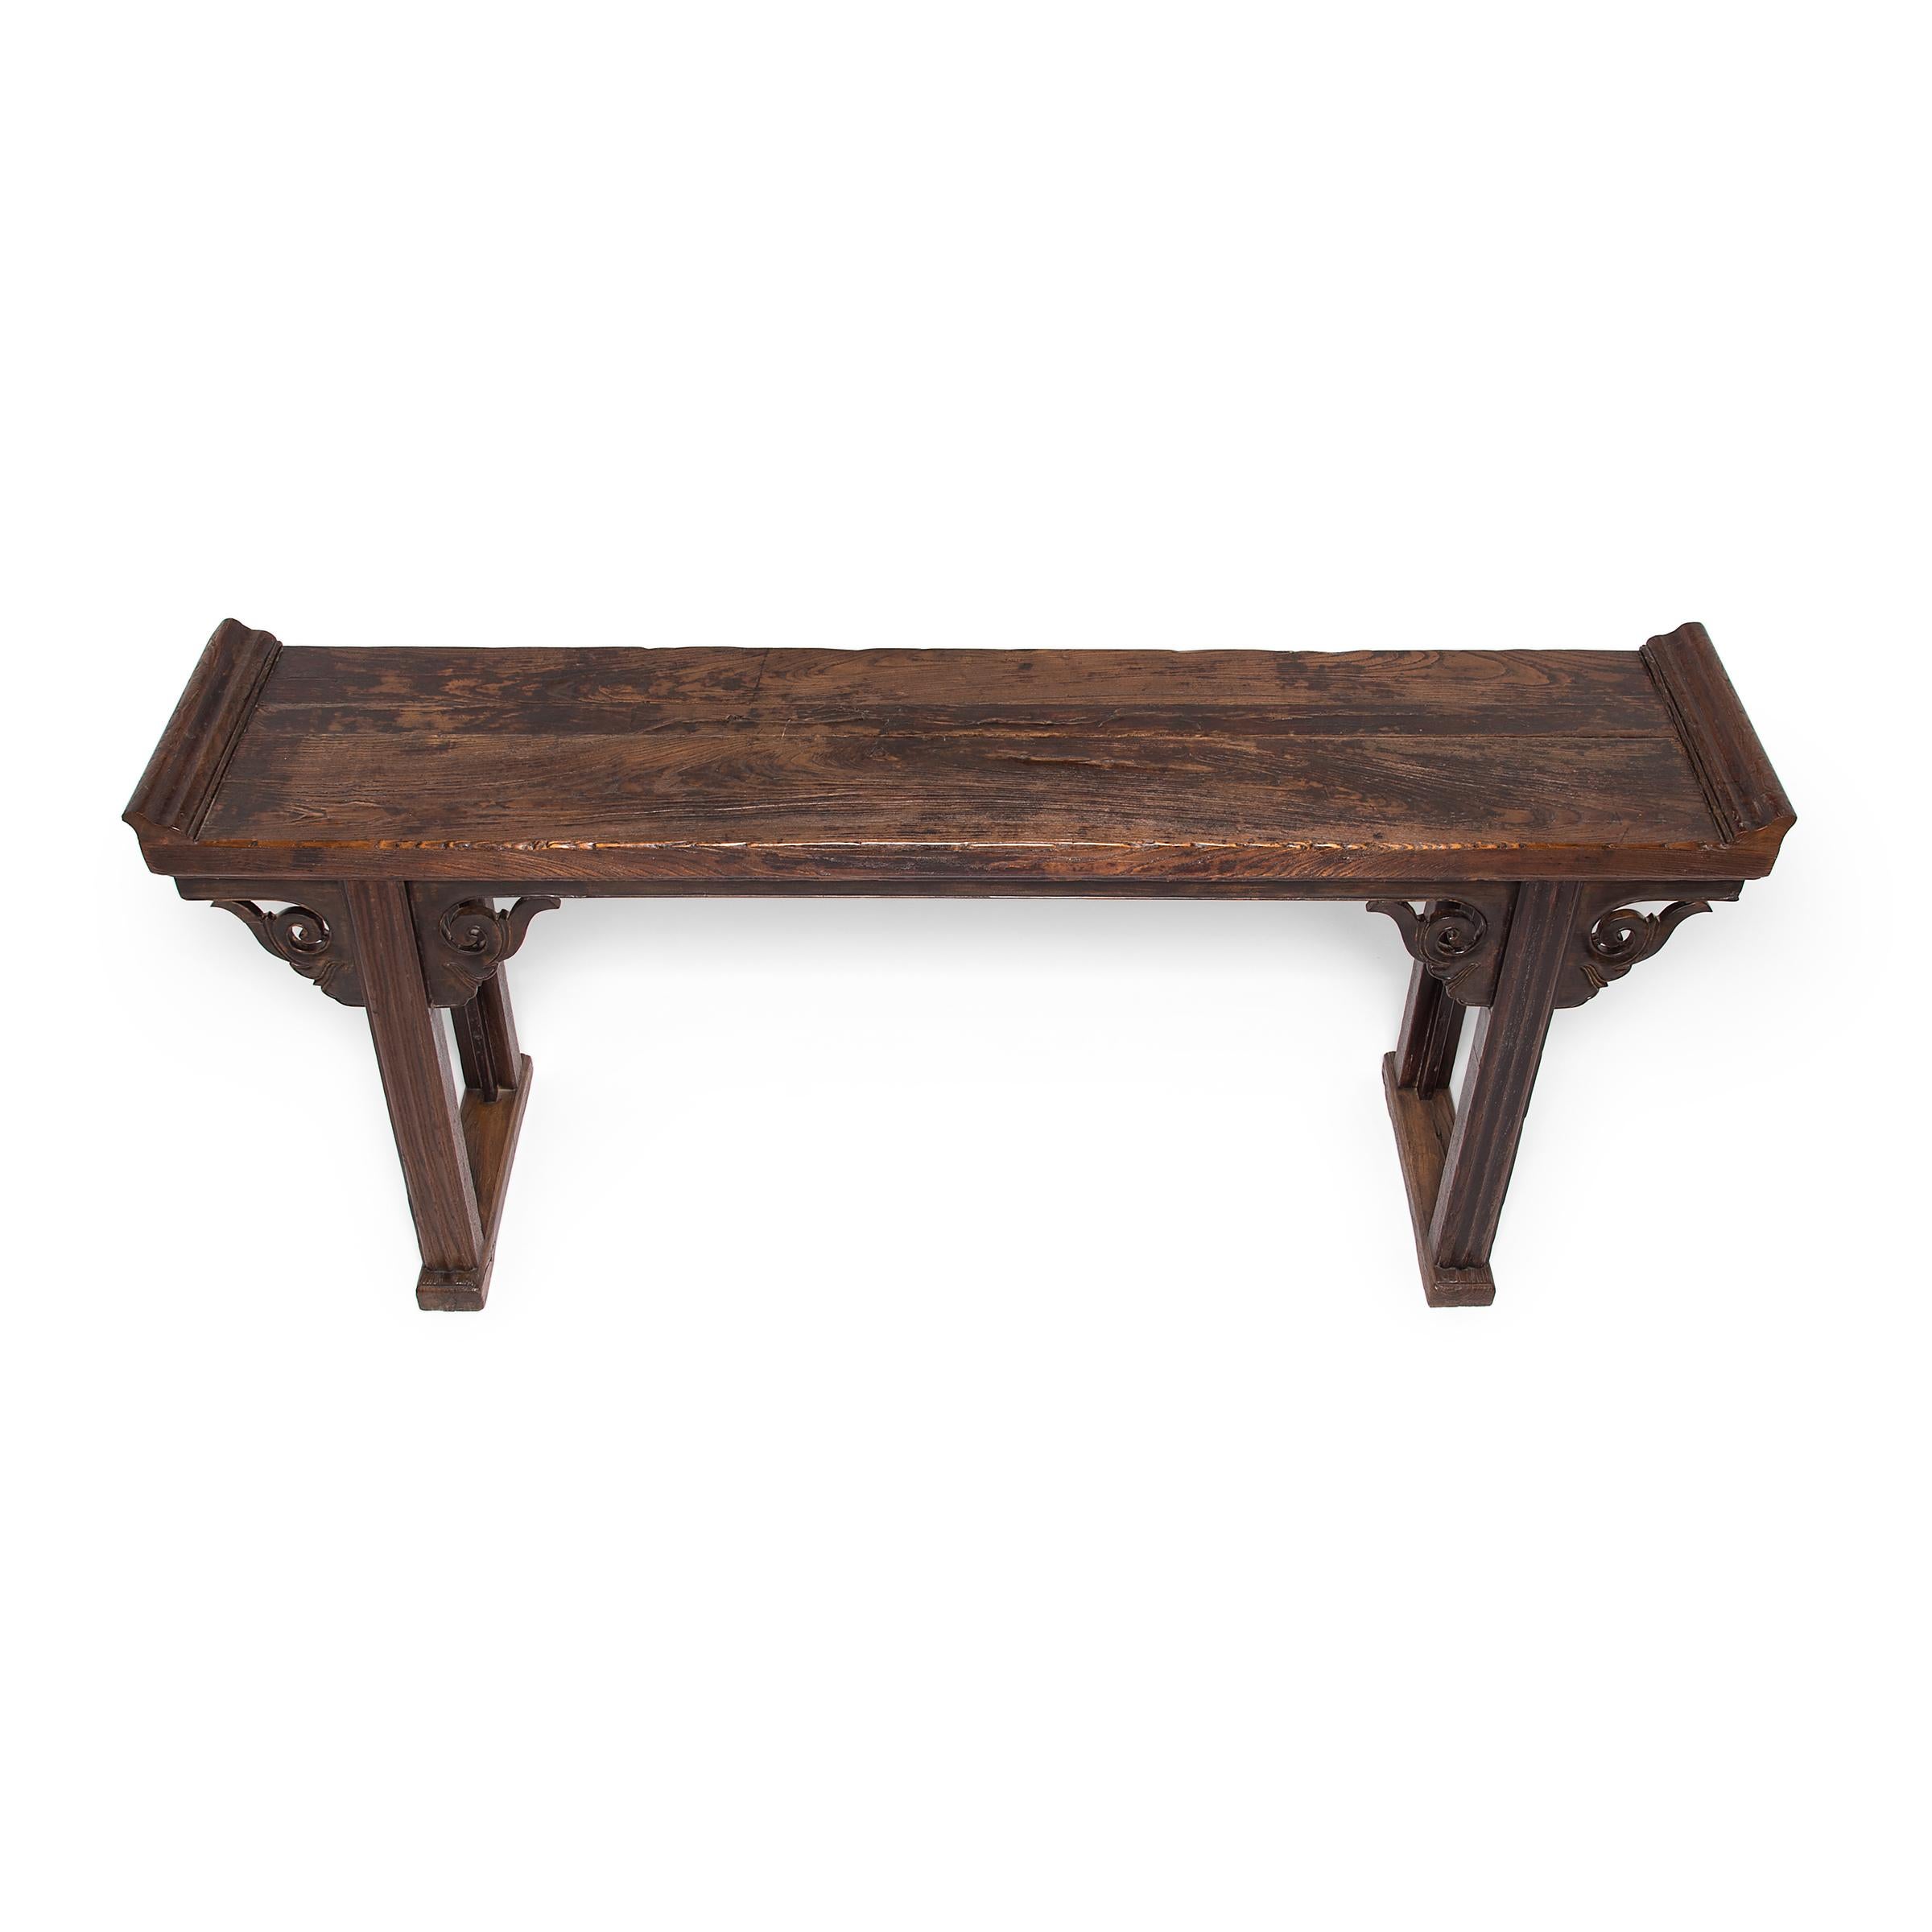 Hand-Carved Chinese Plank Top Console Table with Everted Ends, c. 1850